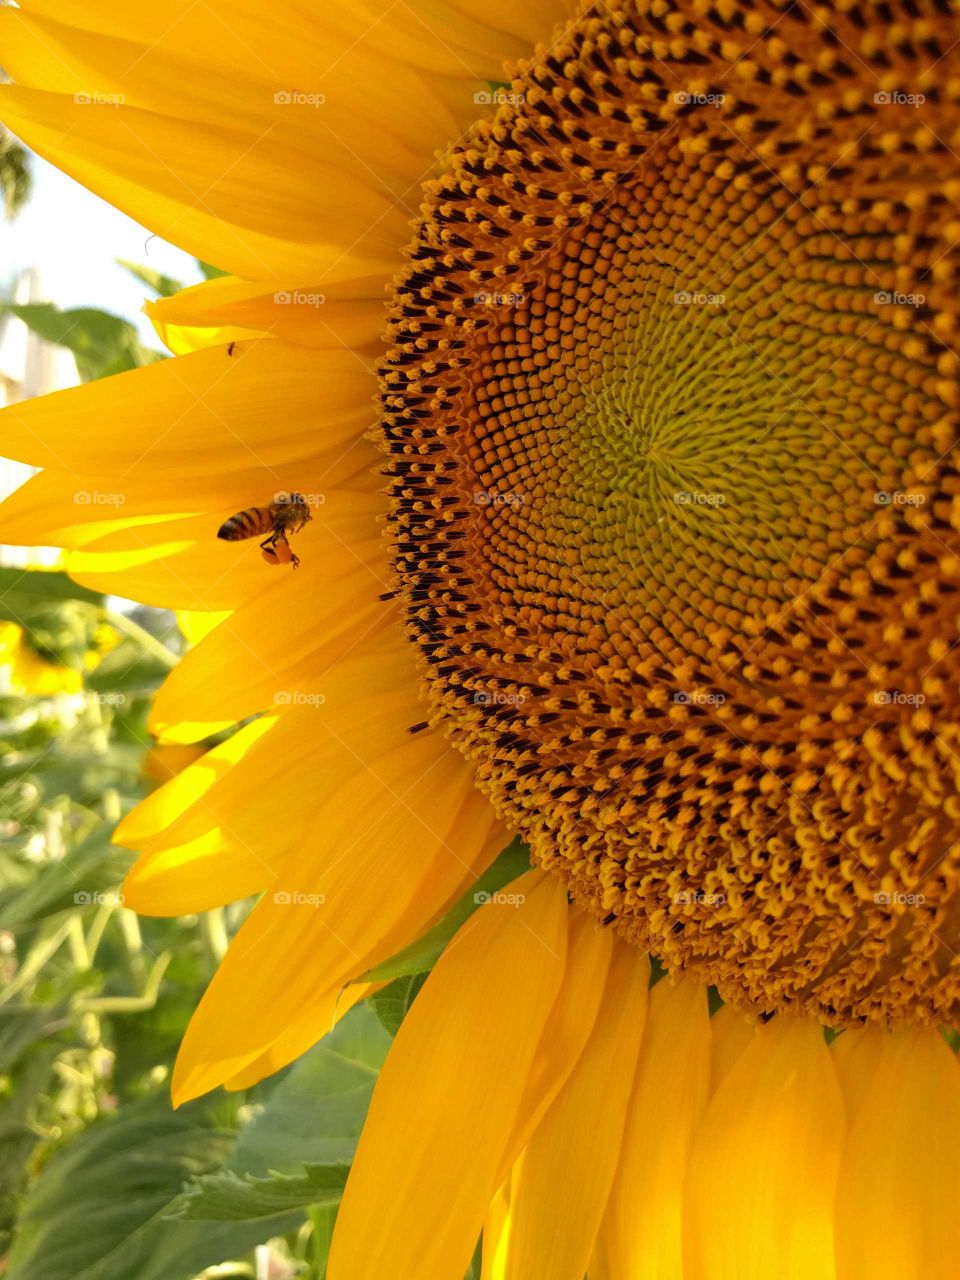 Bee hovering near sunflower